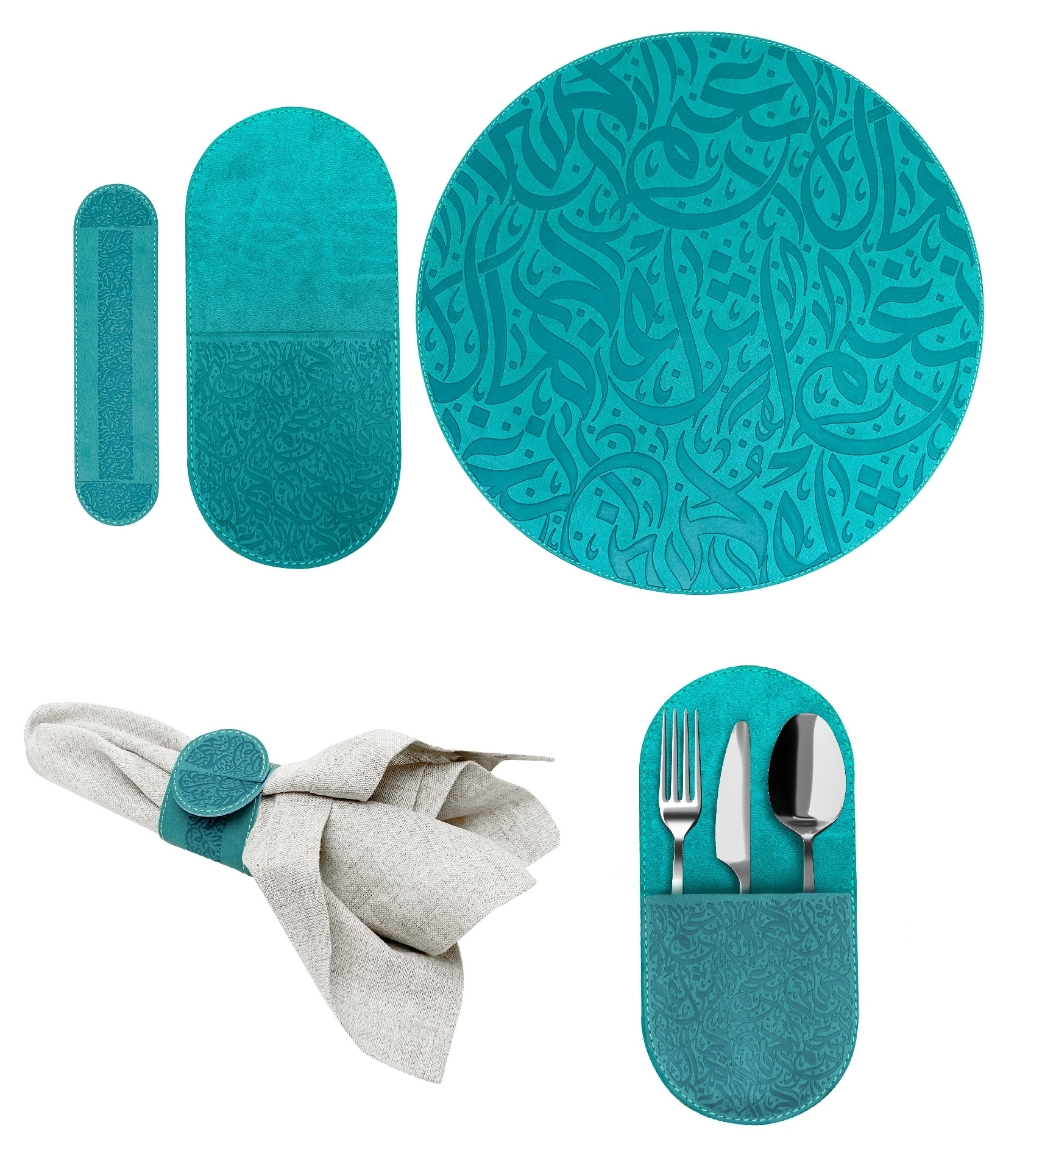 Picture of Nagham Leather Set of 6 Turquoise